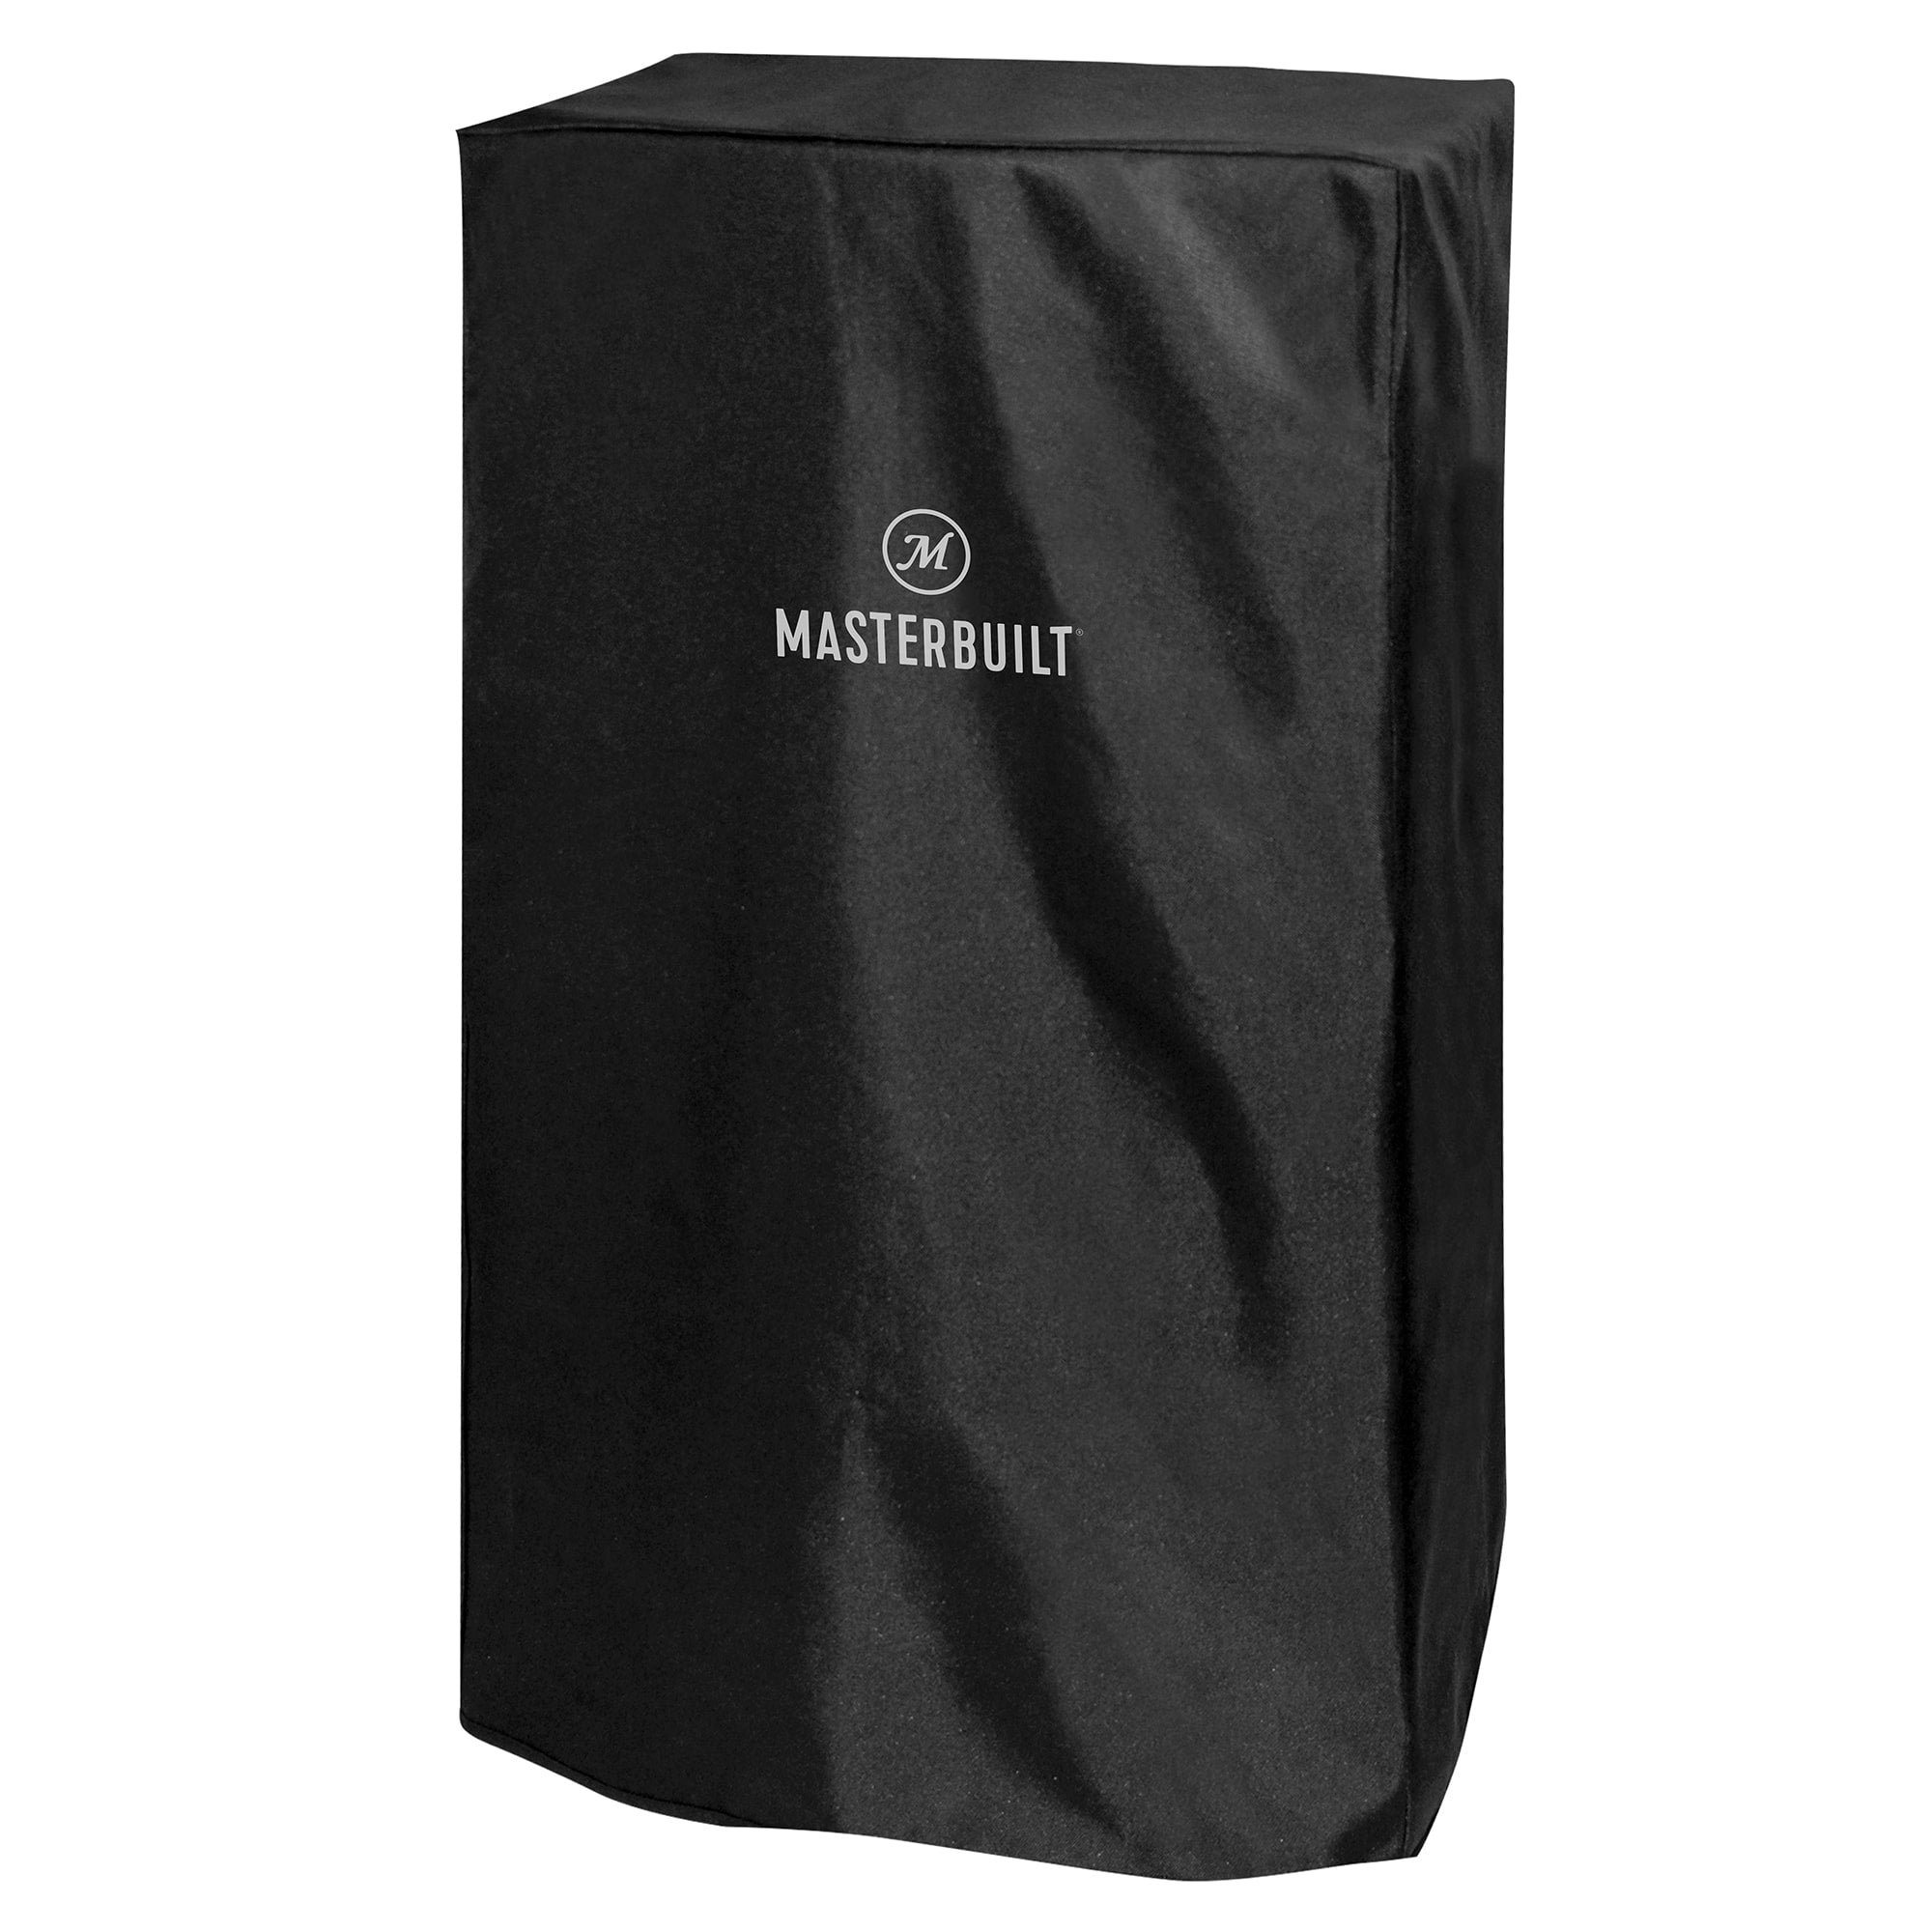 Masterbuilt 40 Inch Electric Smoker Cover